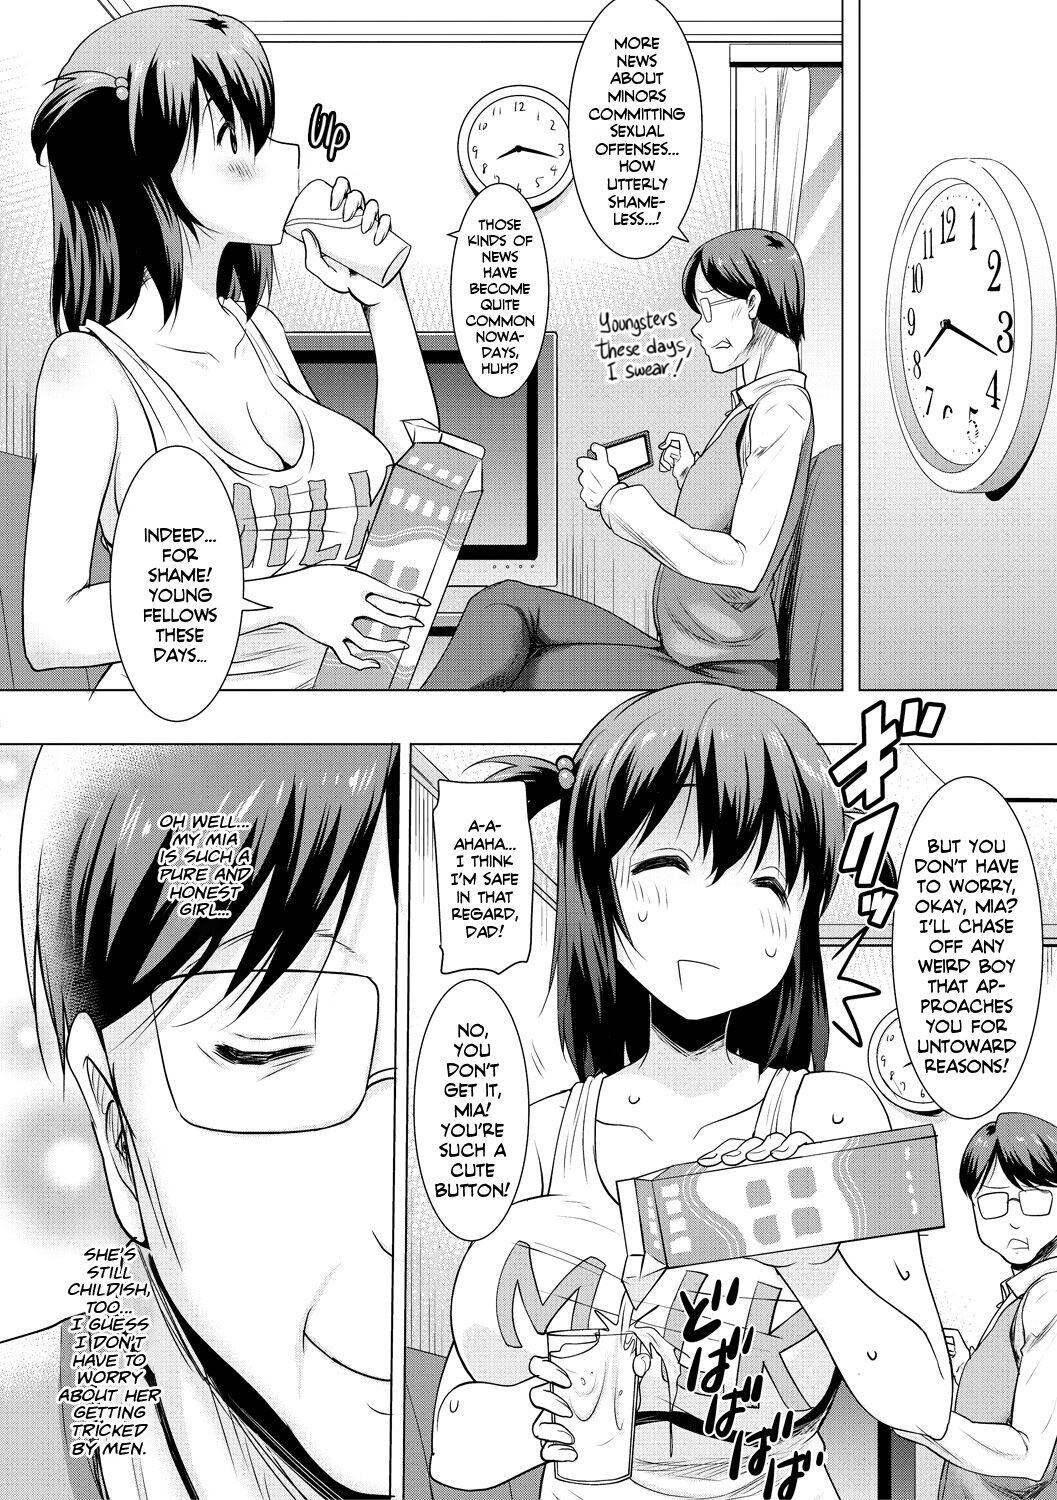 [Pony-R] I Can't Live Without My Little Sister's Tongue Chapter 01-02 + Secret Baby-making Sex with a Big-titted Mother and Daughter! (Kyonyuu Oyako no Shita to Shikyuu ni Renzoku Shasei) [English] [Team Rabu2] [Digital] 86